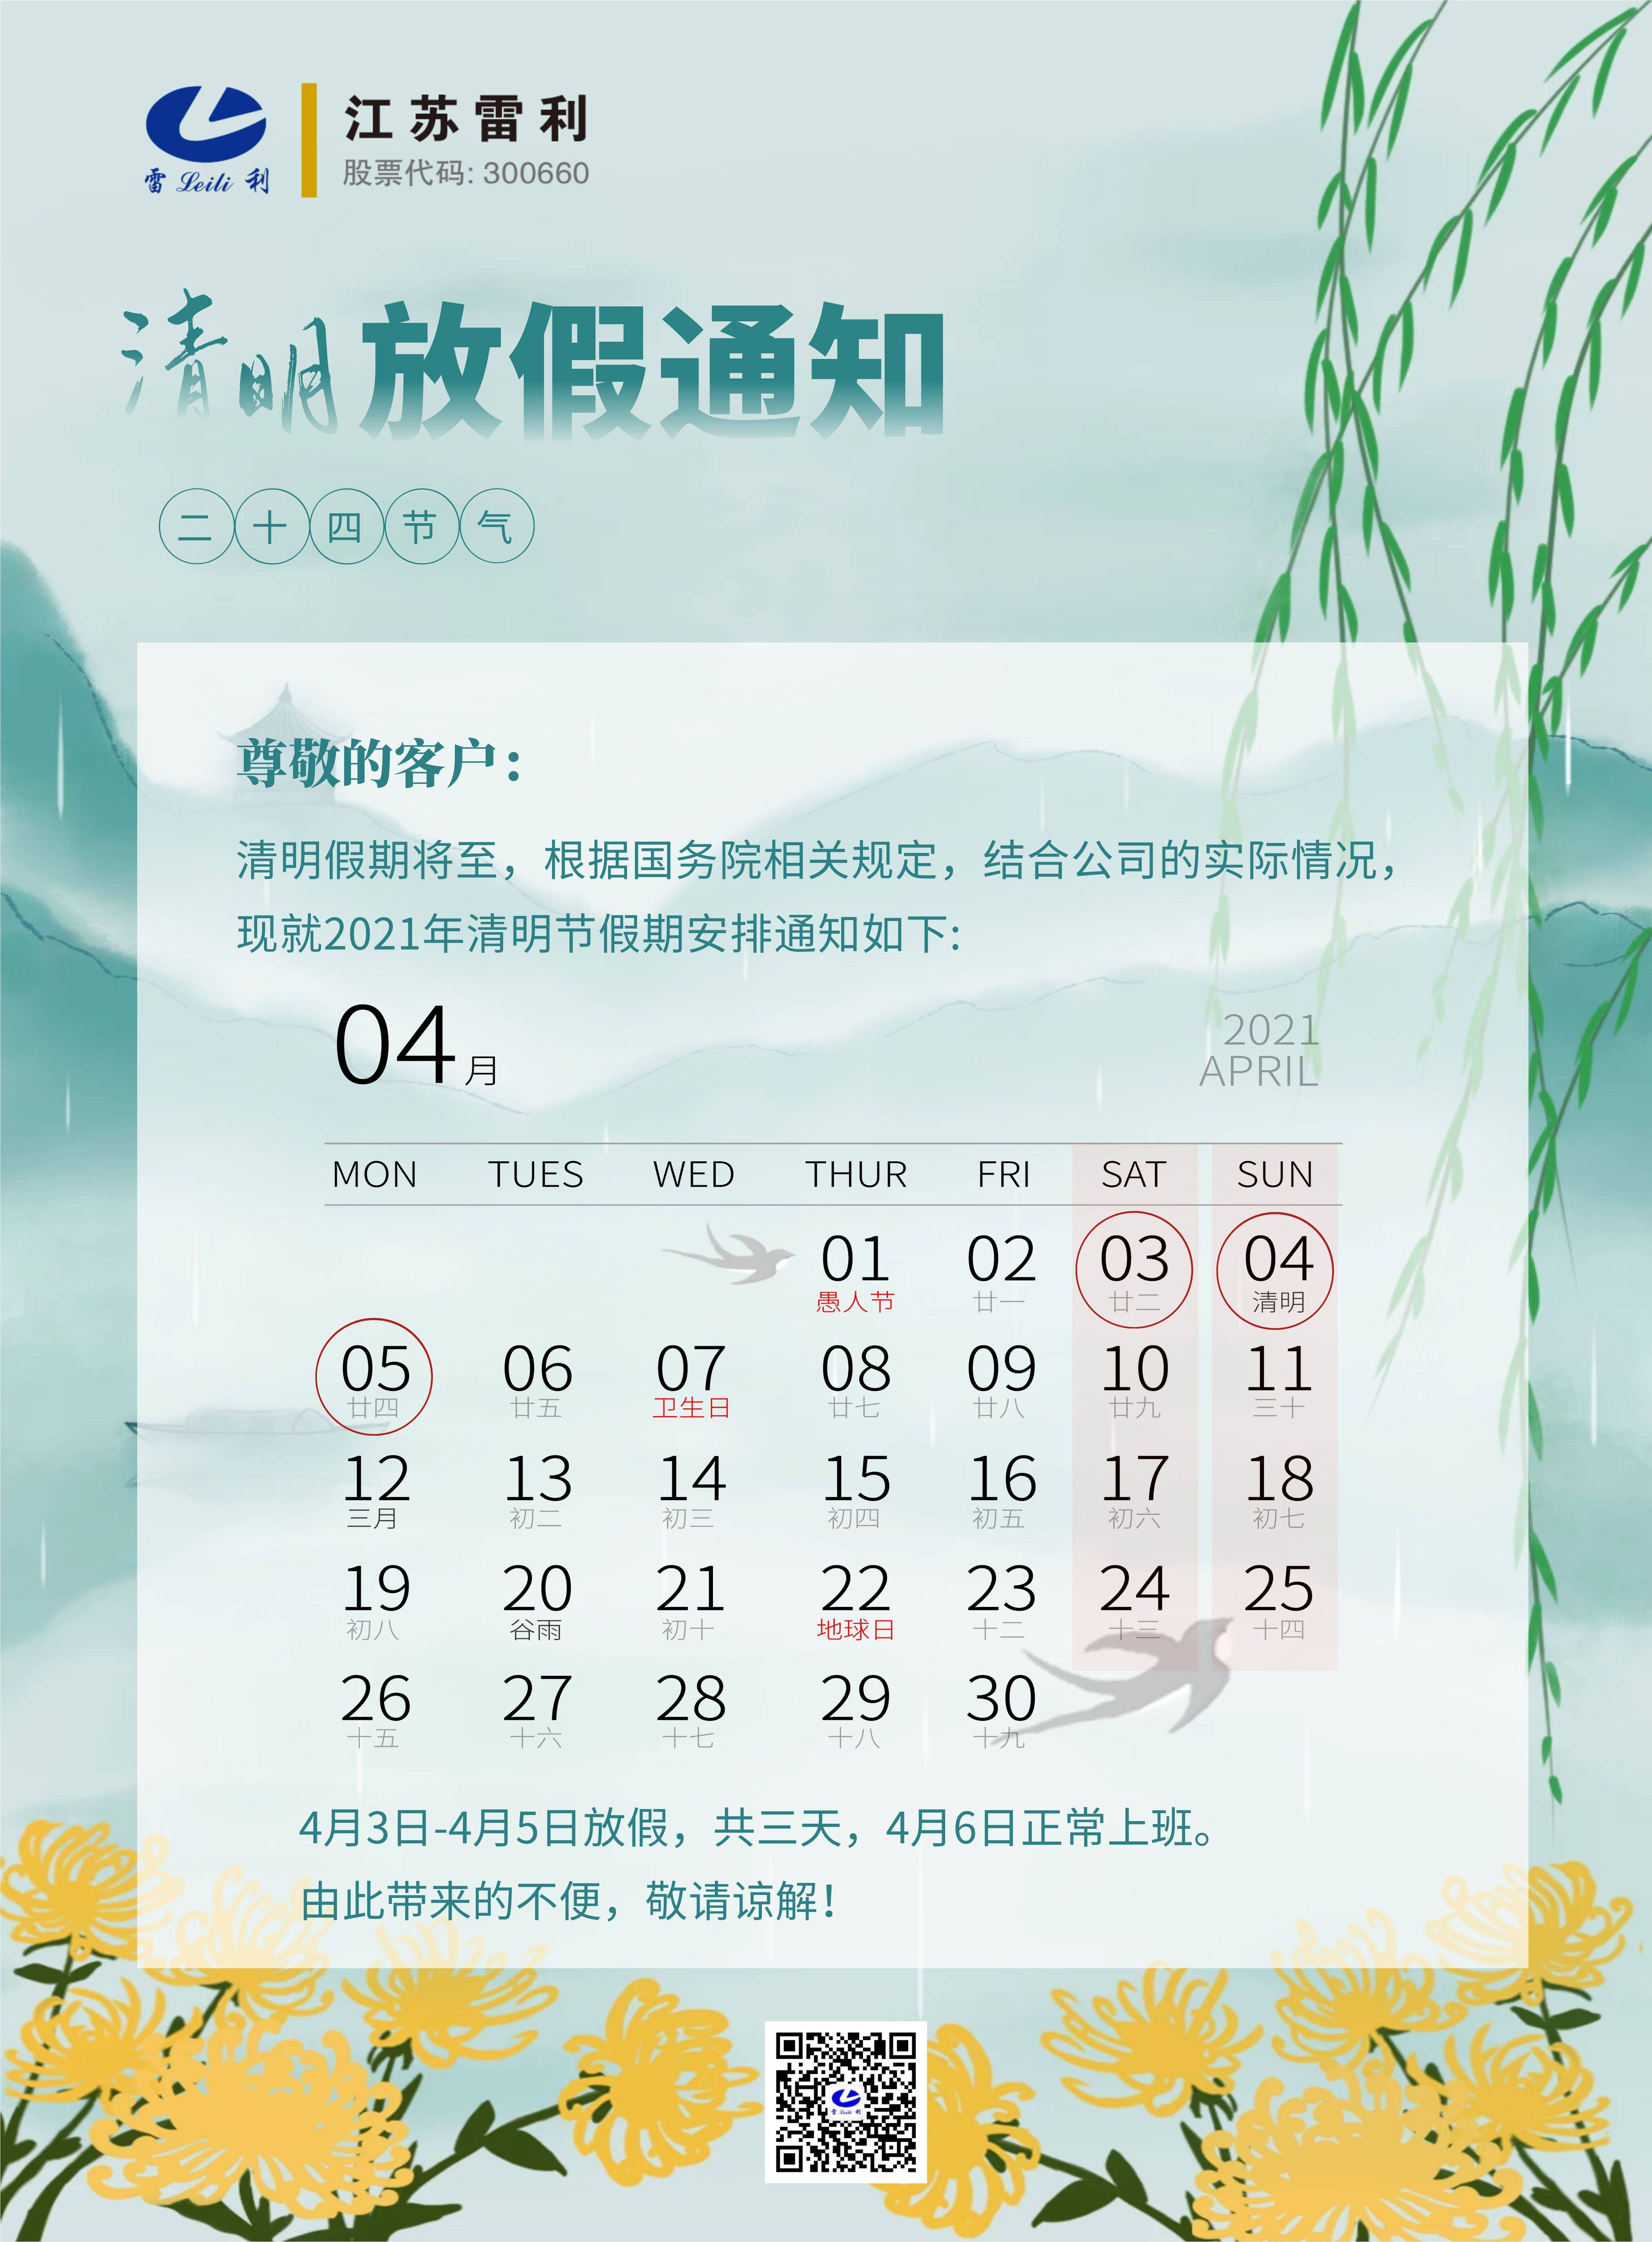 Qingming Festival Holiday Notice